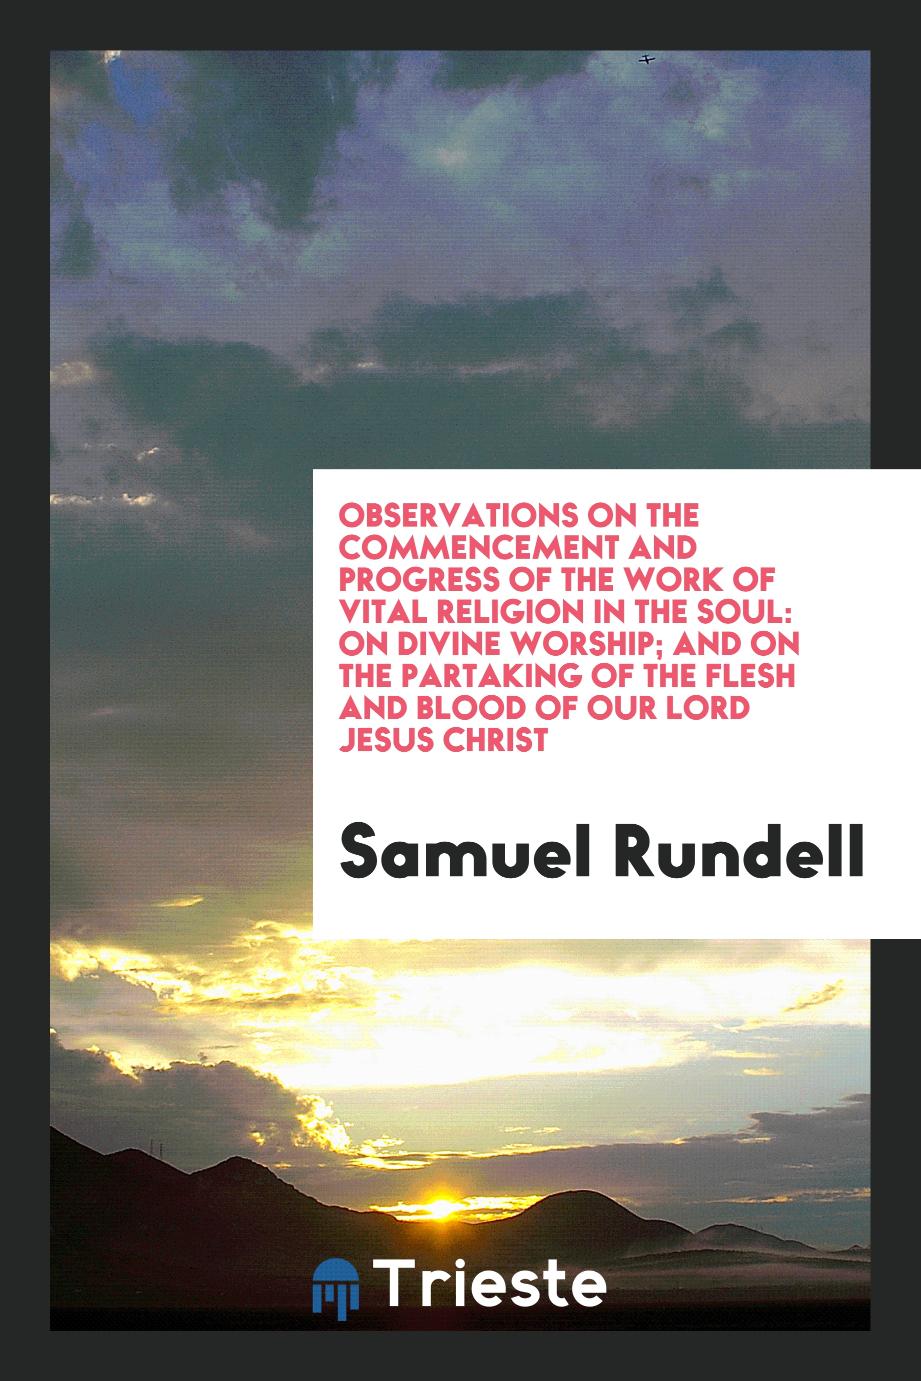 Observations on the Commencement and Progress of the Work of Vital Religion in the Soul: On divine worship; and on the partaking of the flesh and blood of our Lord Jesus Christ